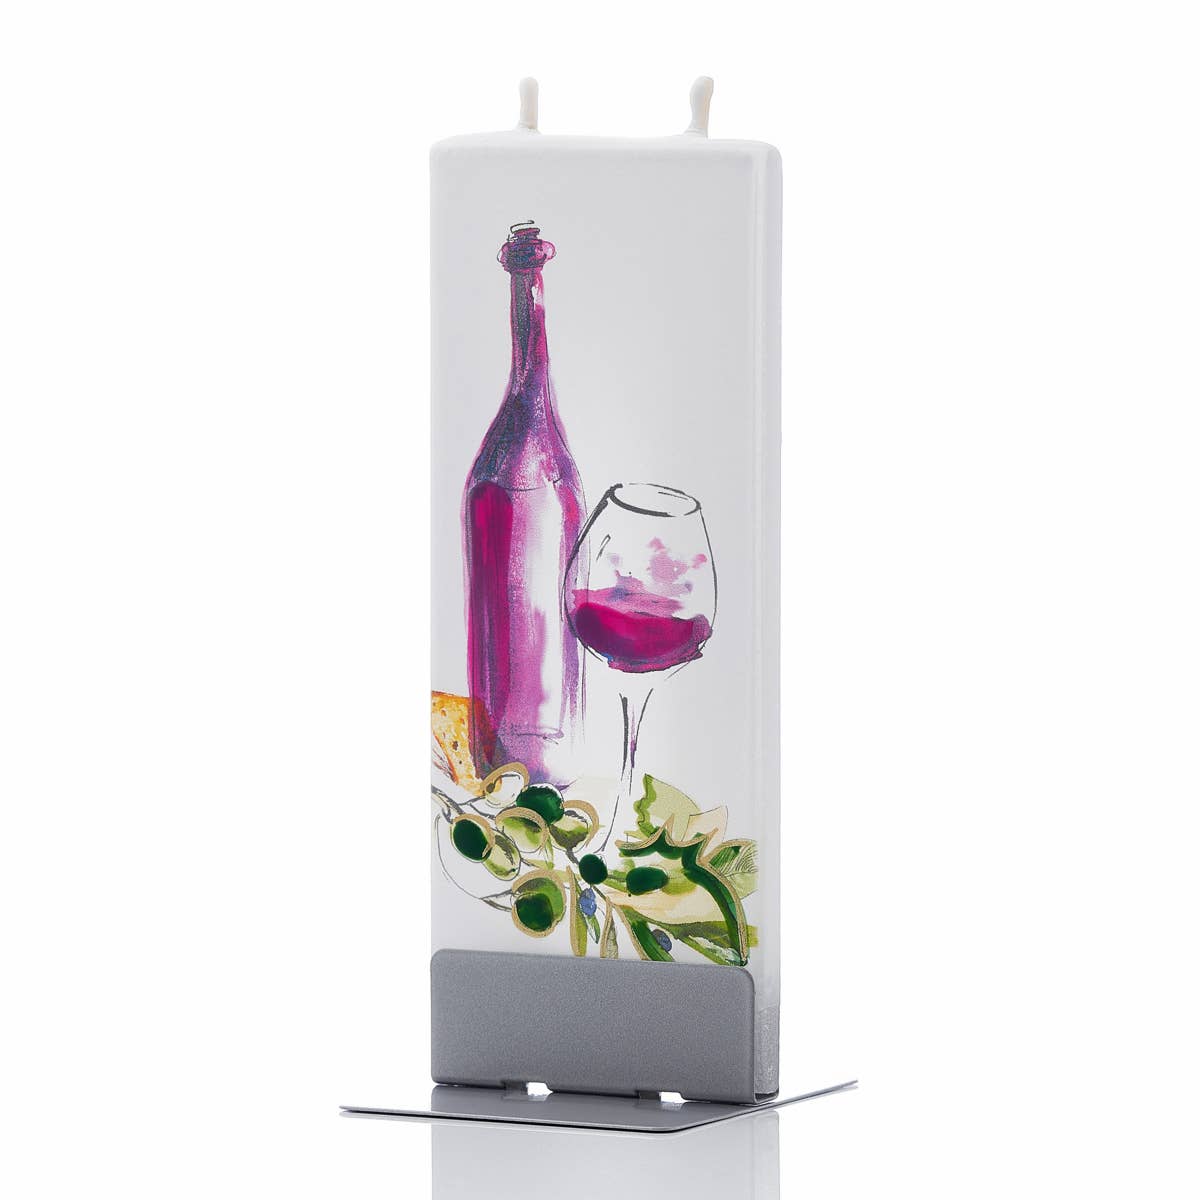 Flat Handmade Candle - Wine with Olives